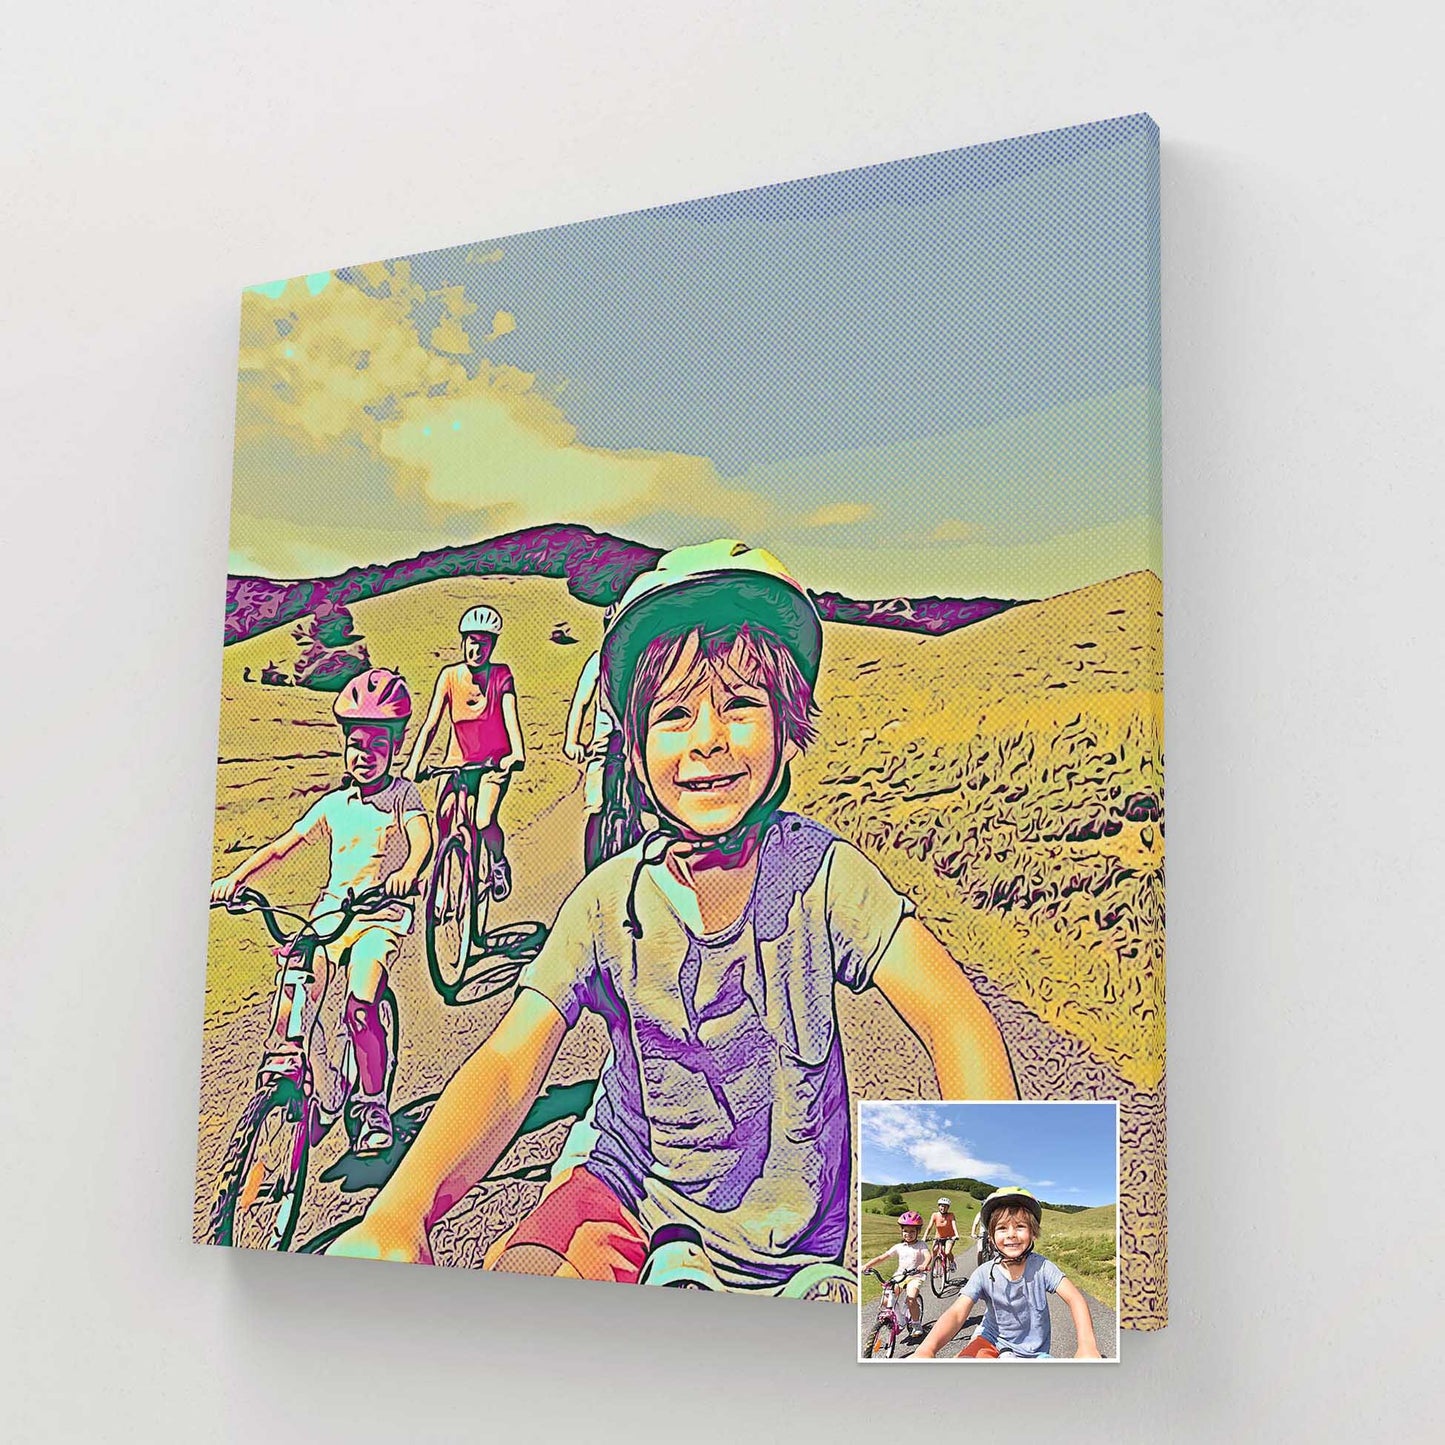 Celebrate the joy of family and friends with our Personalised Blue and Yellow Cartoon Canvas. These creative artworks, created from your photos, evoke laughter, smiles, and a sense of togetherness.